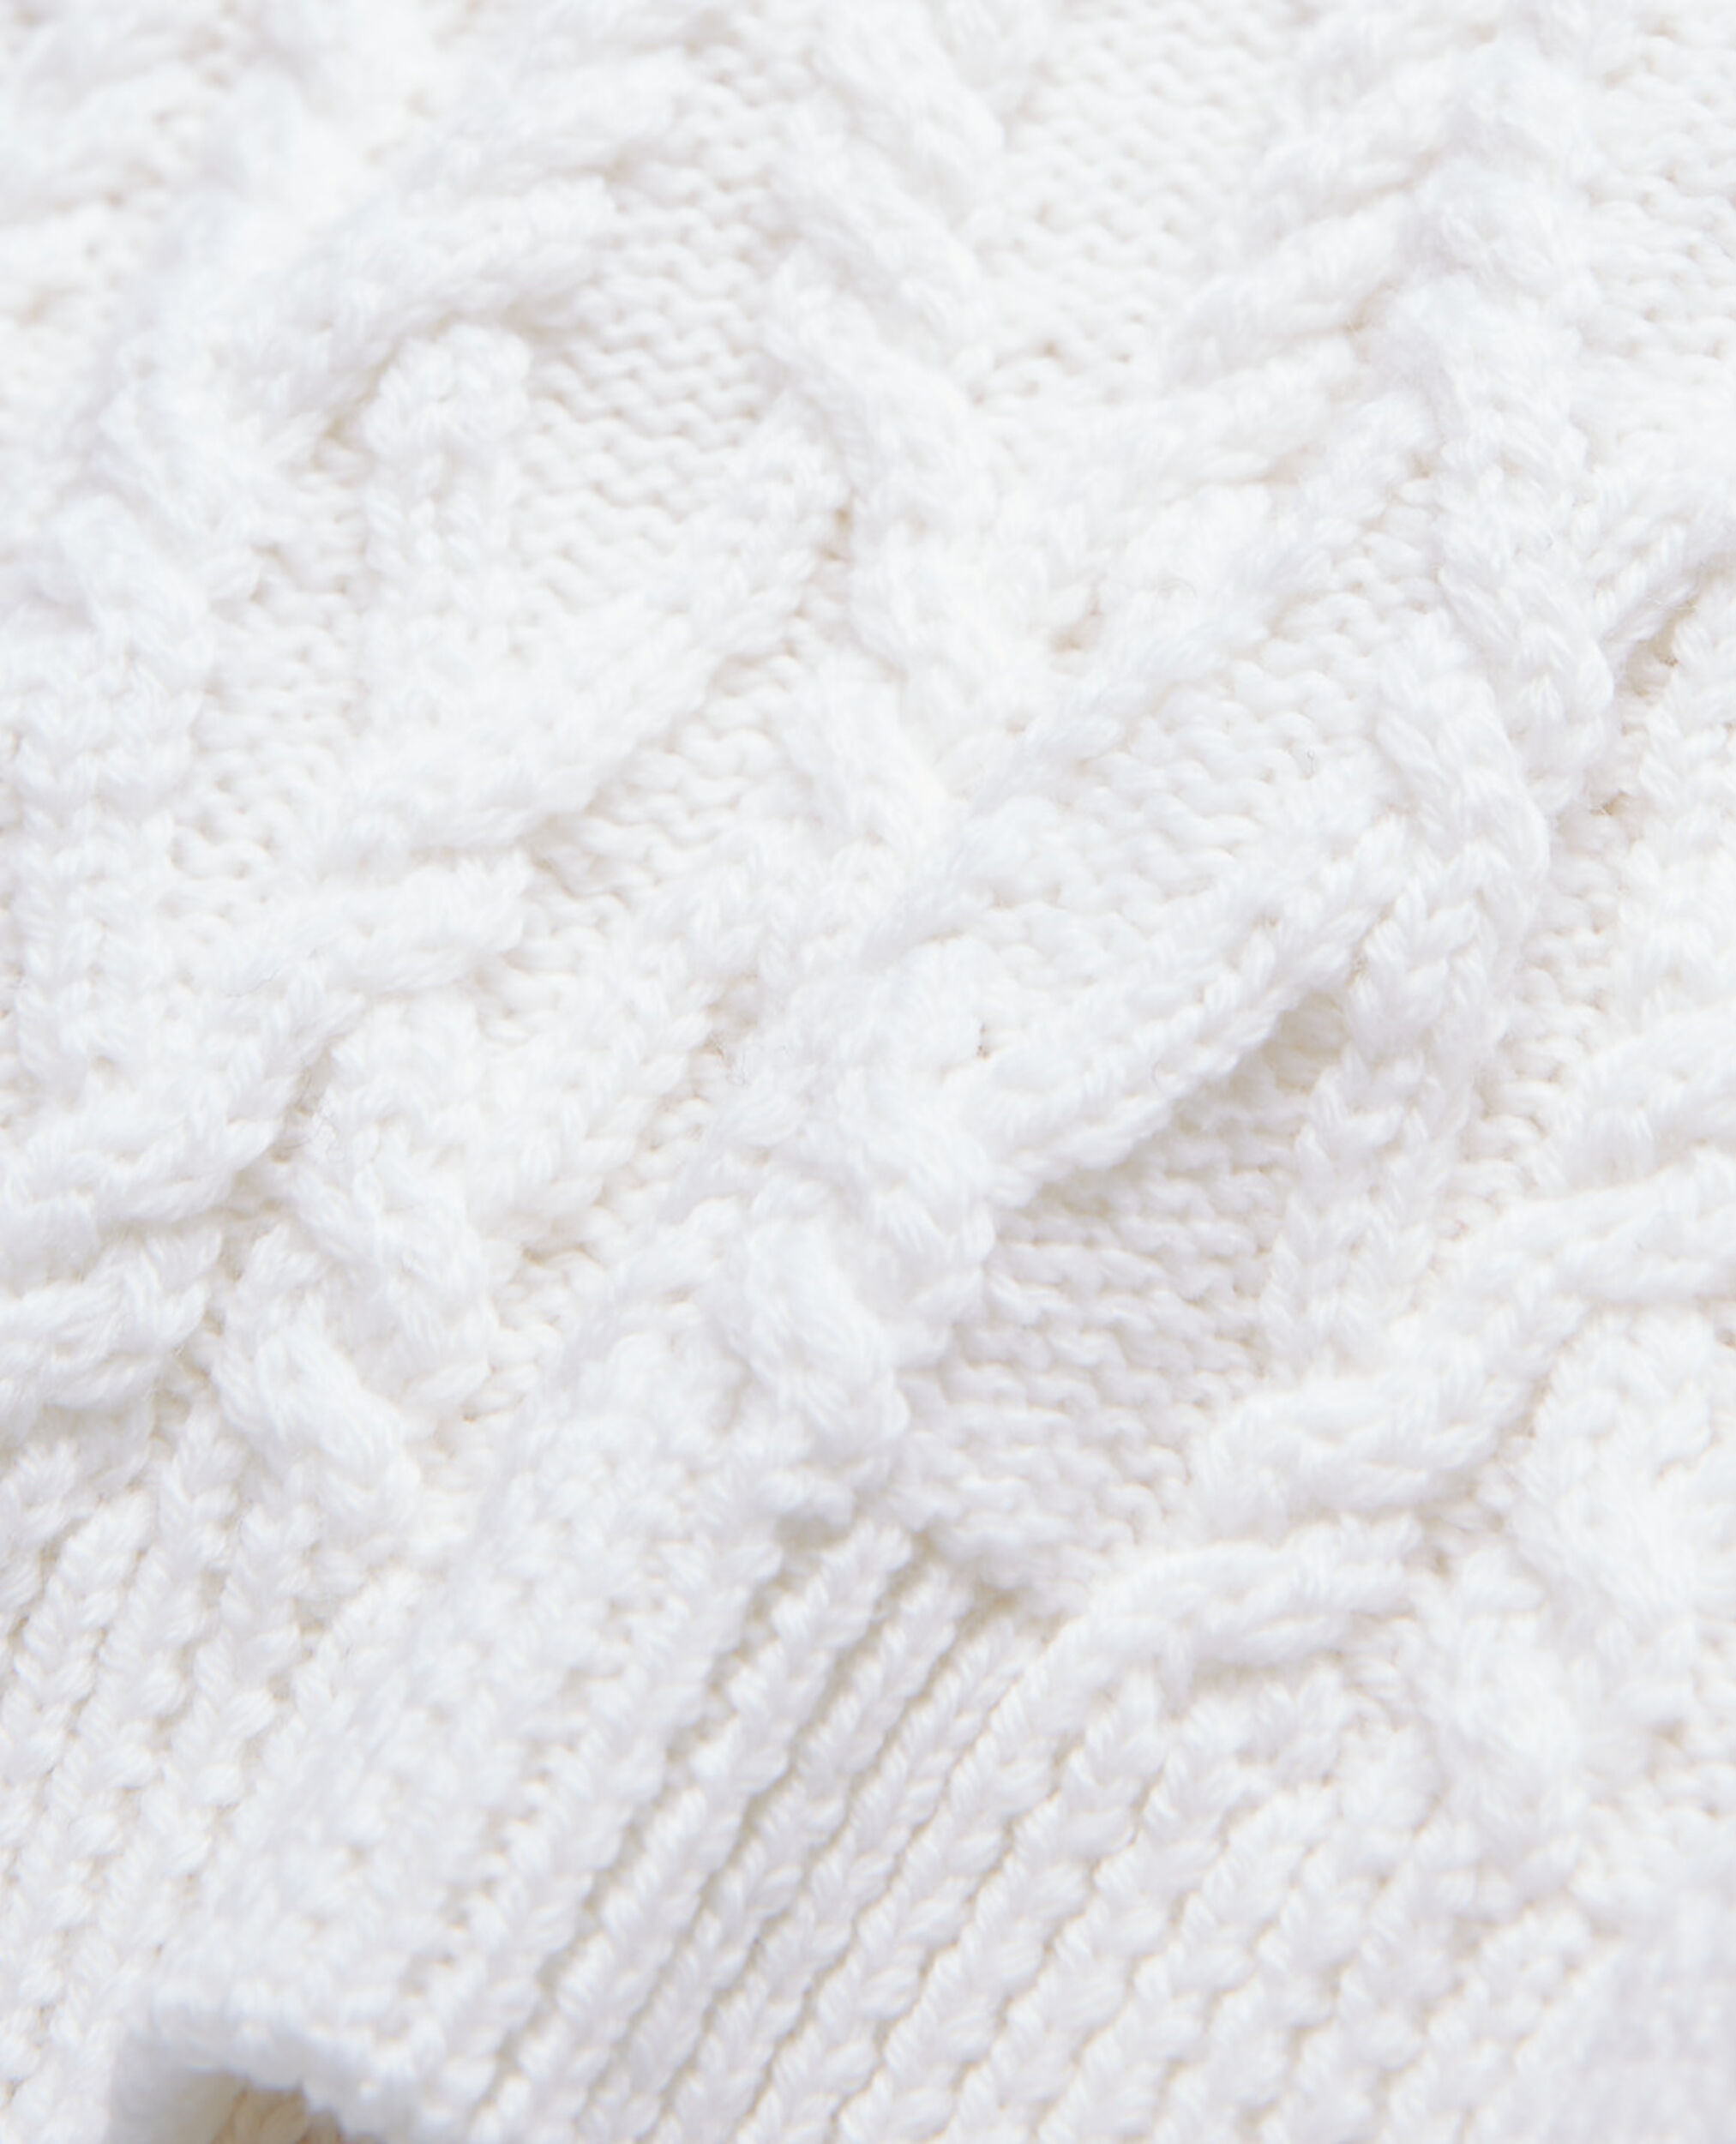 Ecrufarbener Wollpullover, WHITE, hi-res image number null